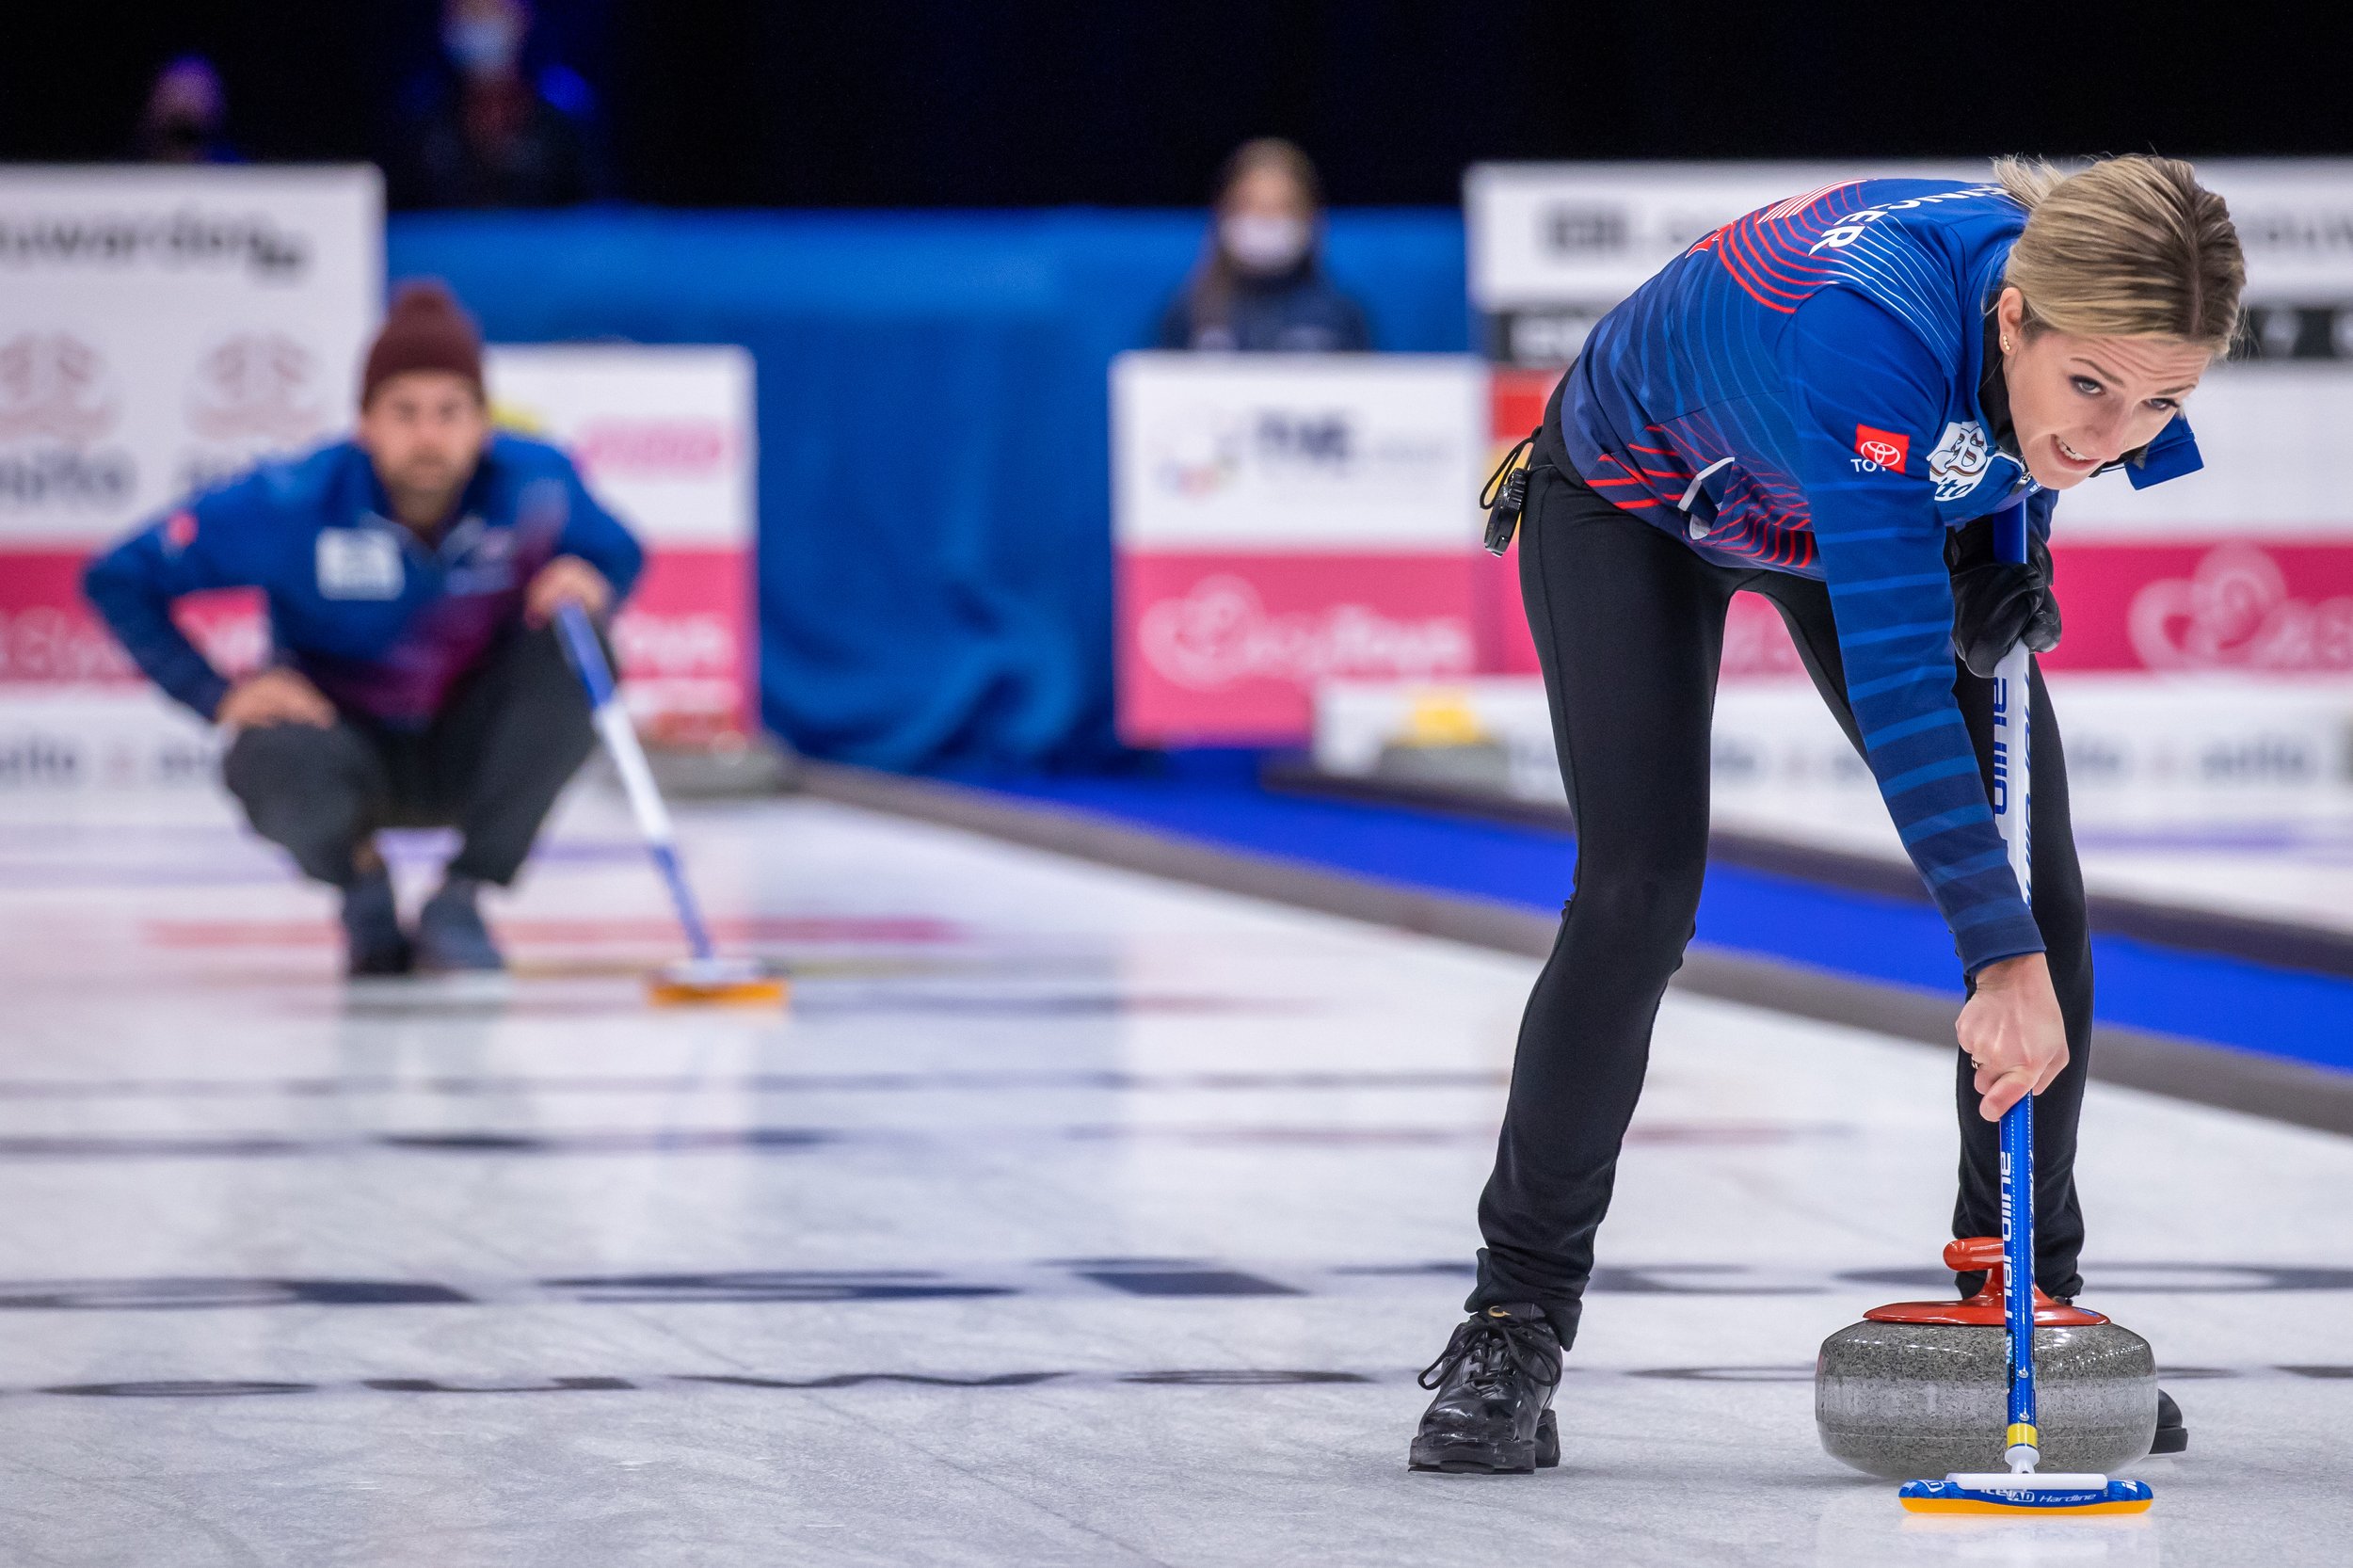 2022 TEAM USA MIXED DOUBLES BROADCAST SCHEDULE — USA CURLING